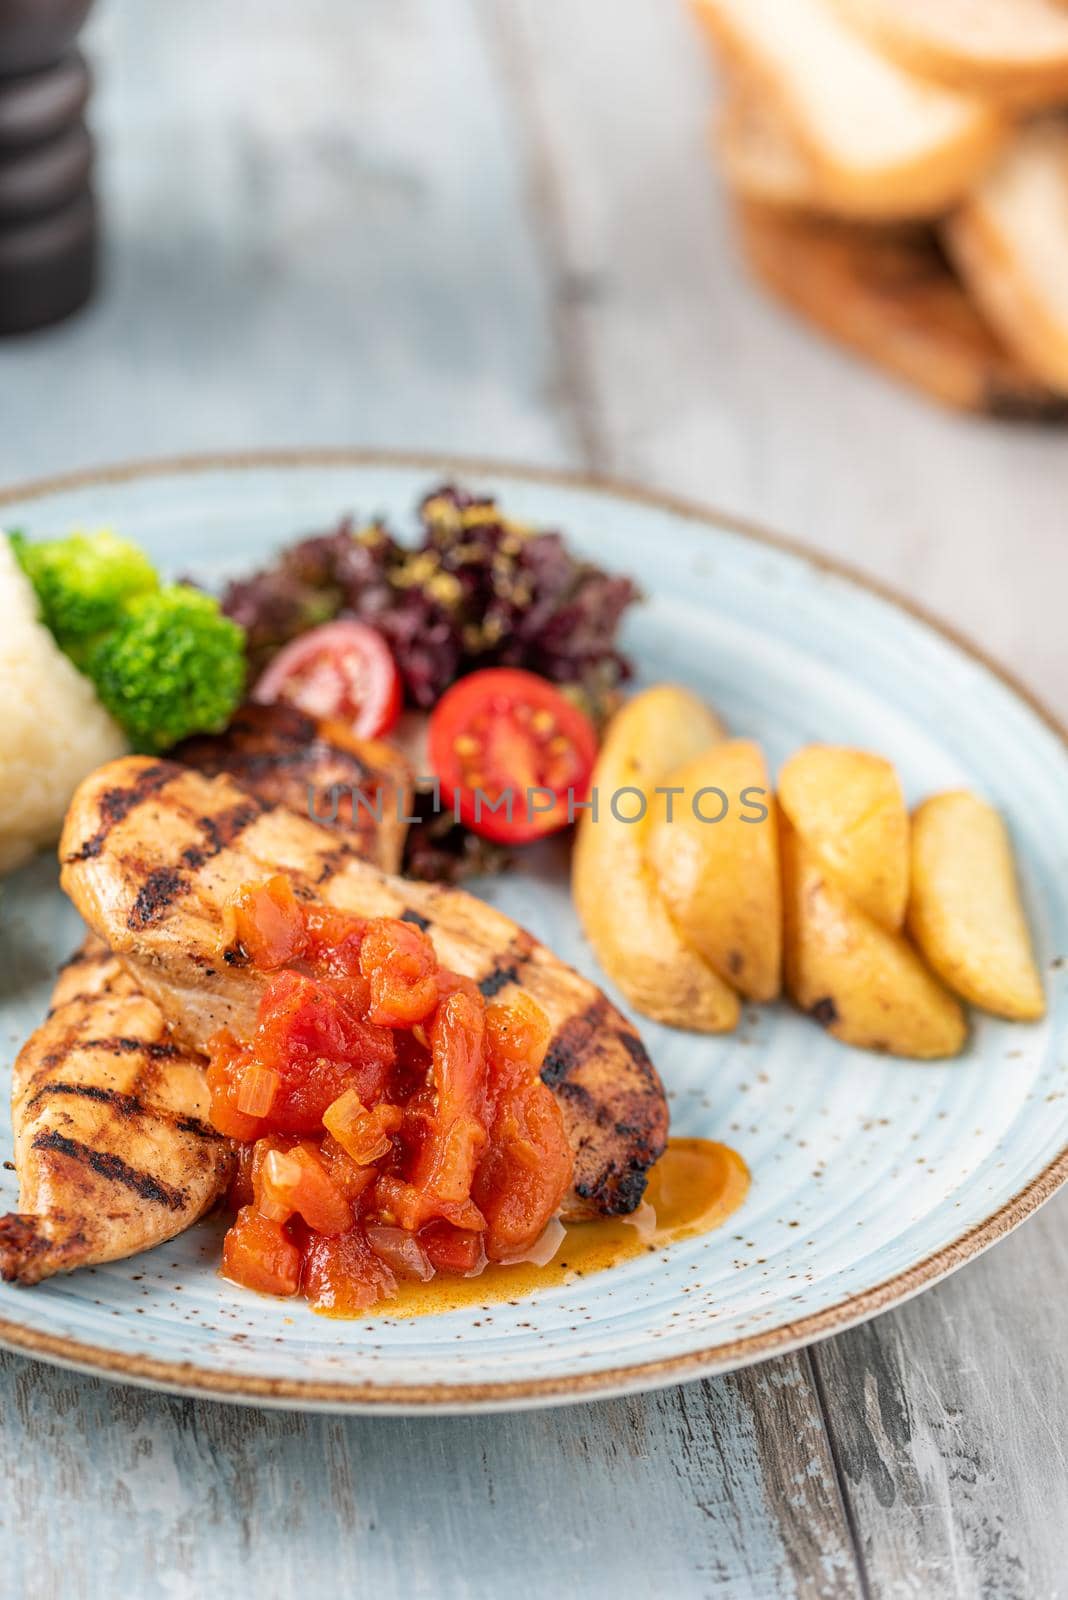 Grilled chicken breast by Sonat